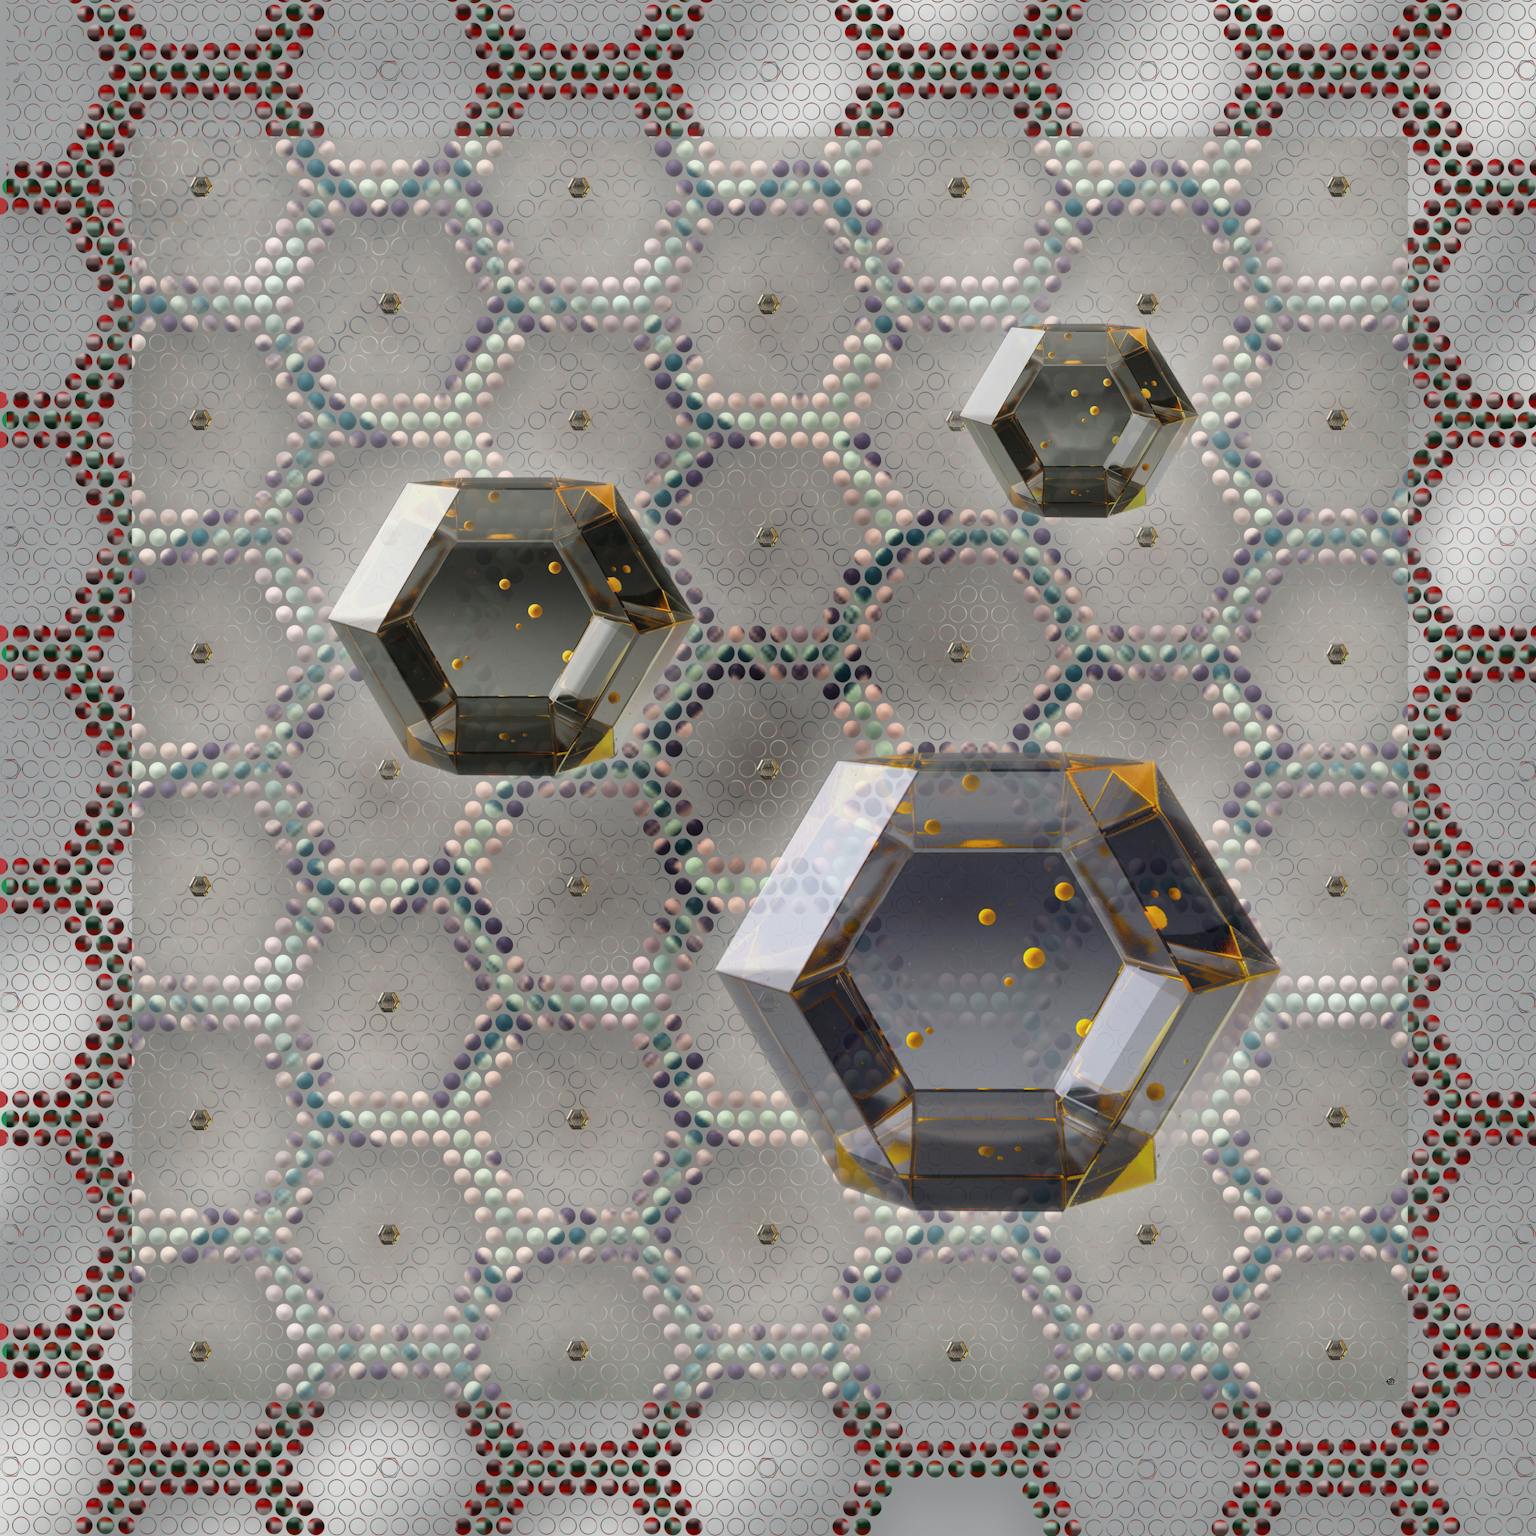 Image for entry 'From 2D tiling to polytope'